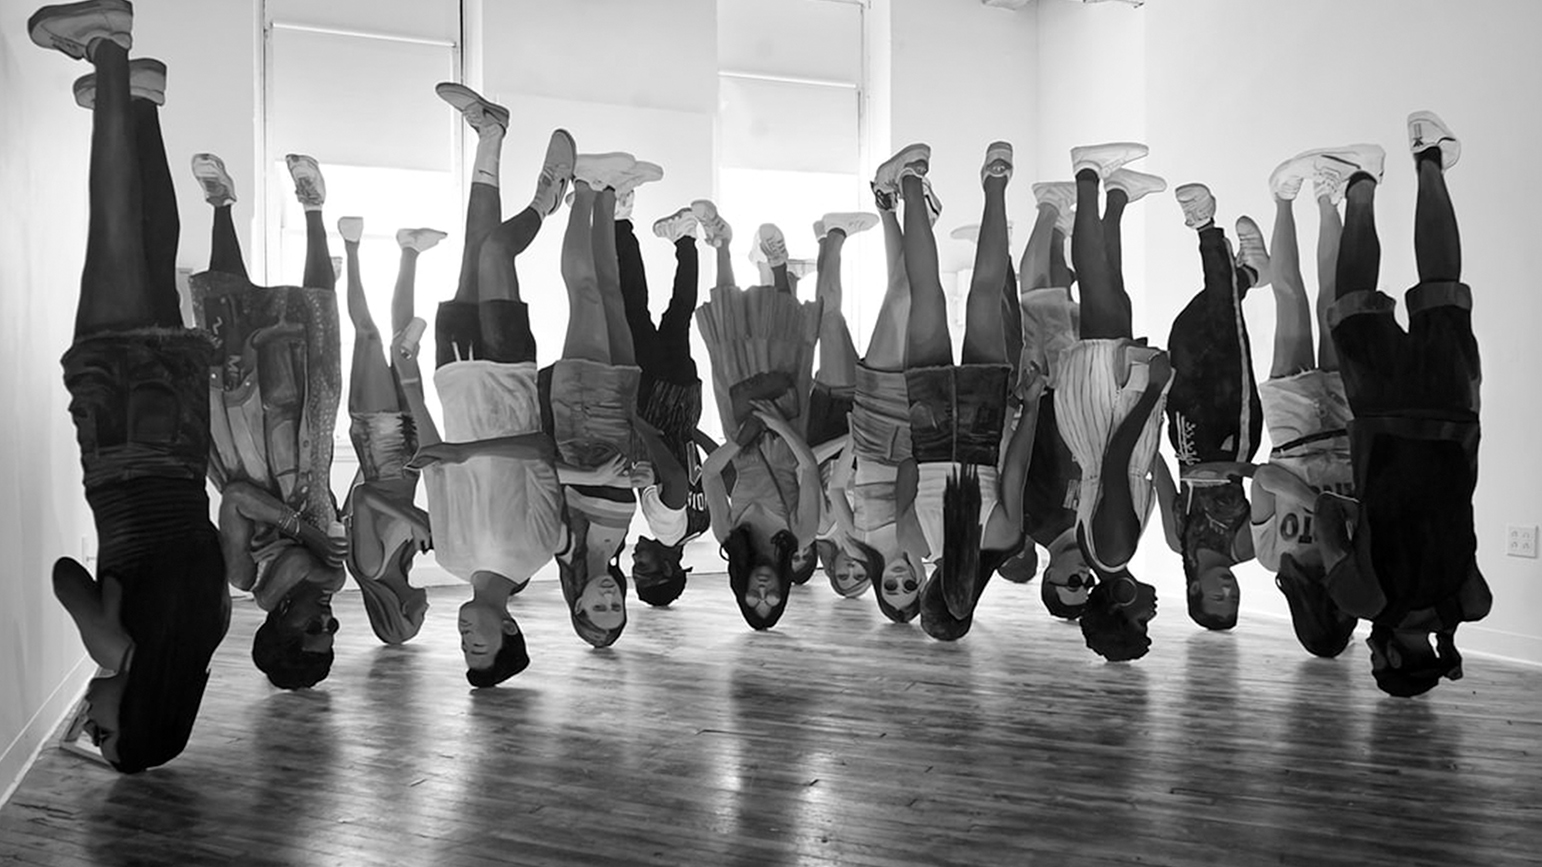 Black and white digitally-created image of a group of people upside down in an empty room